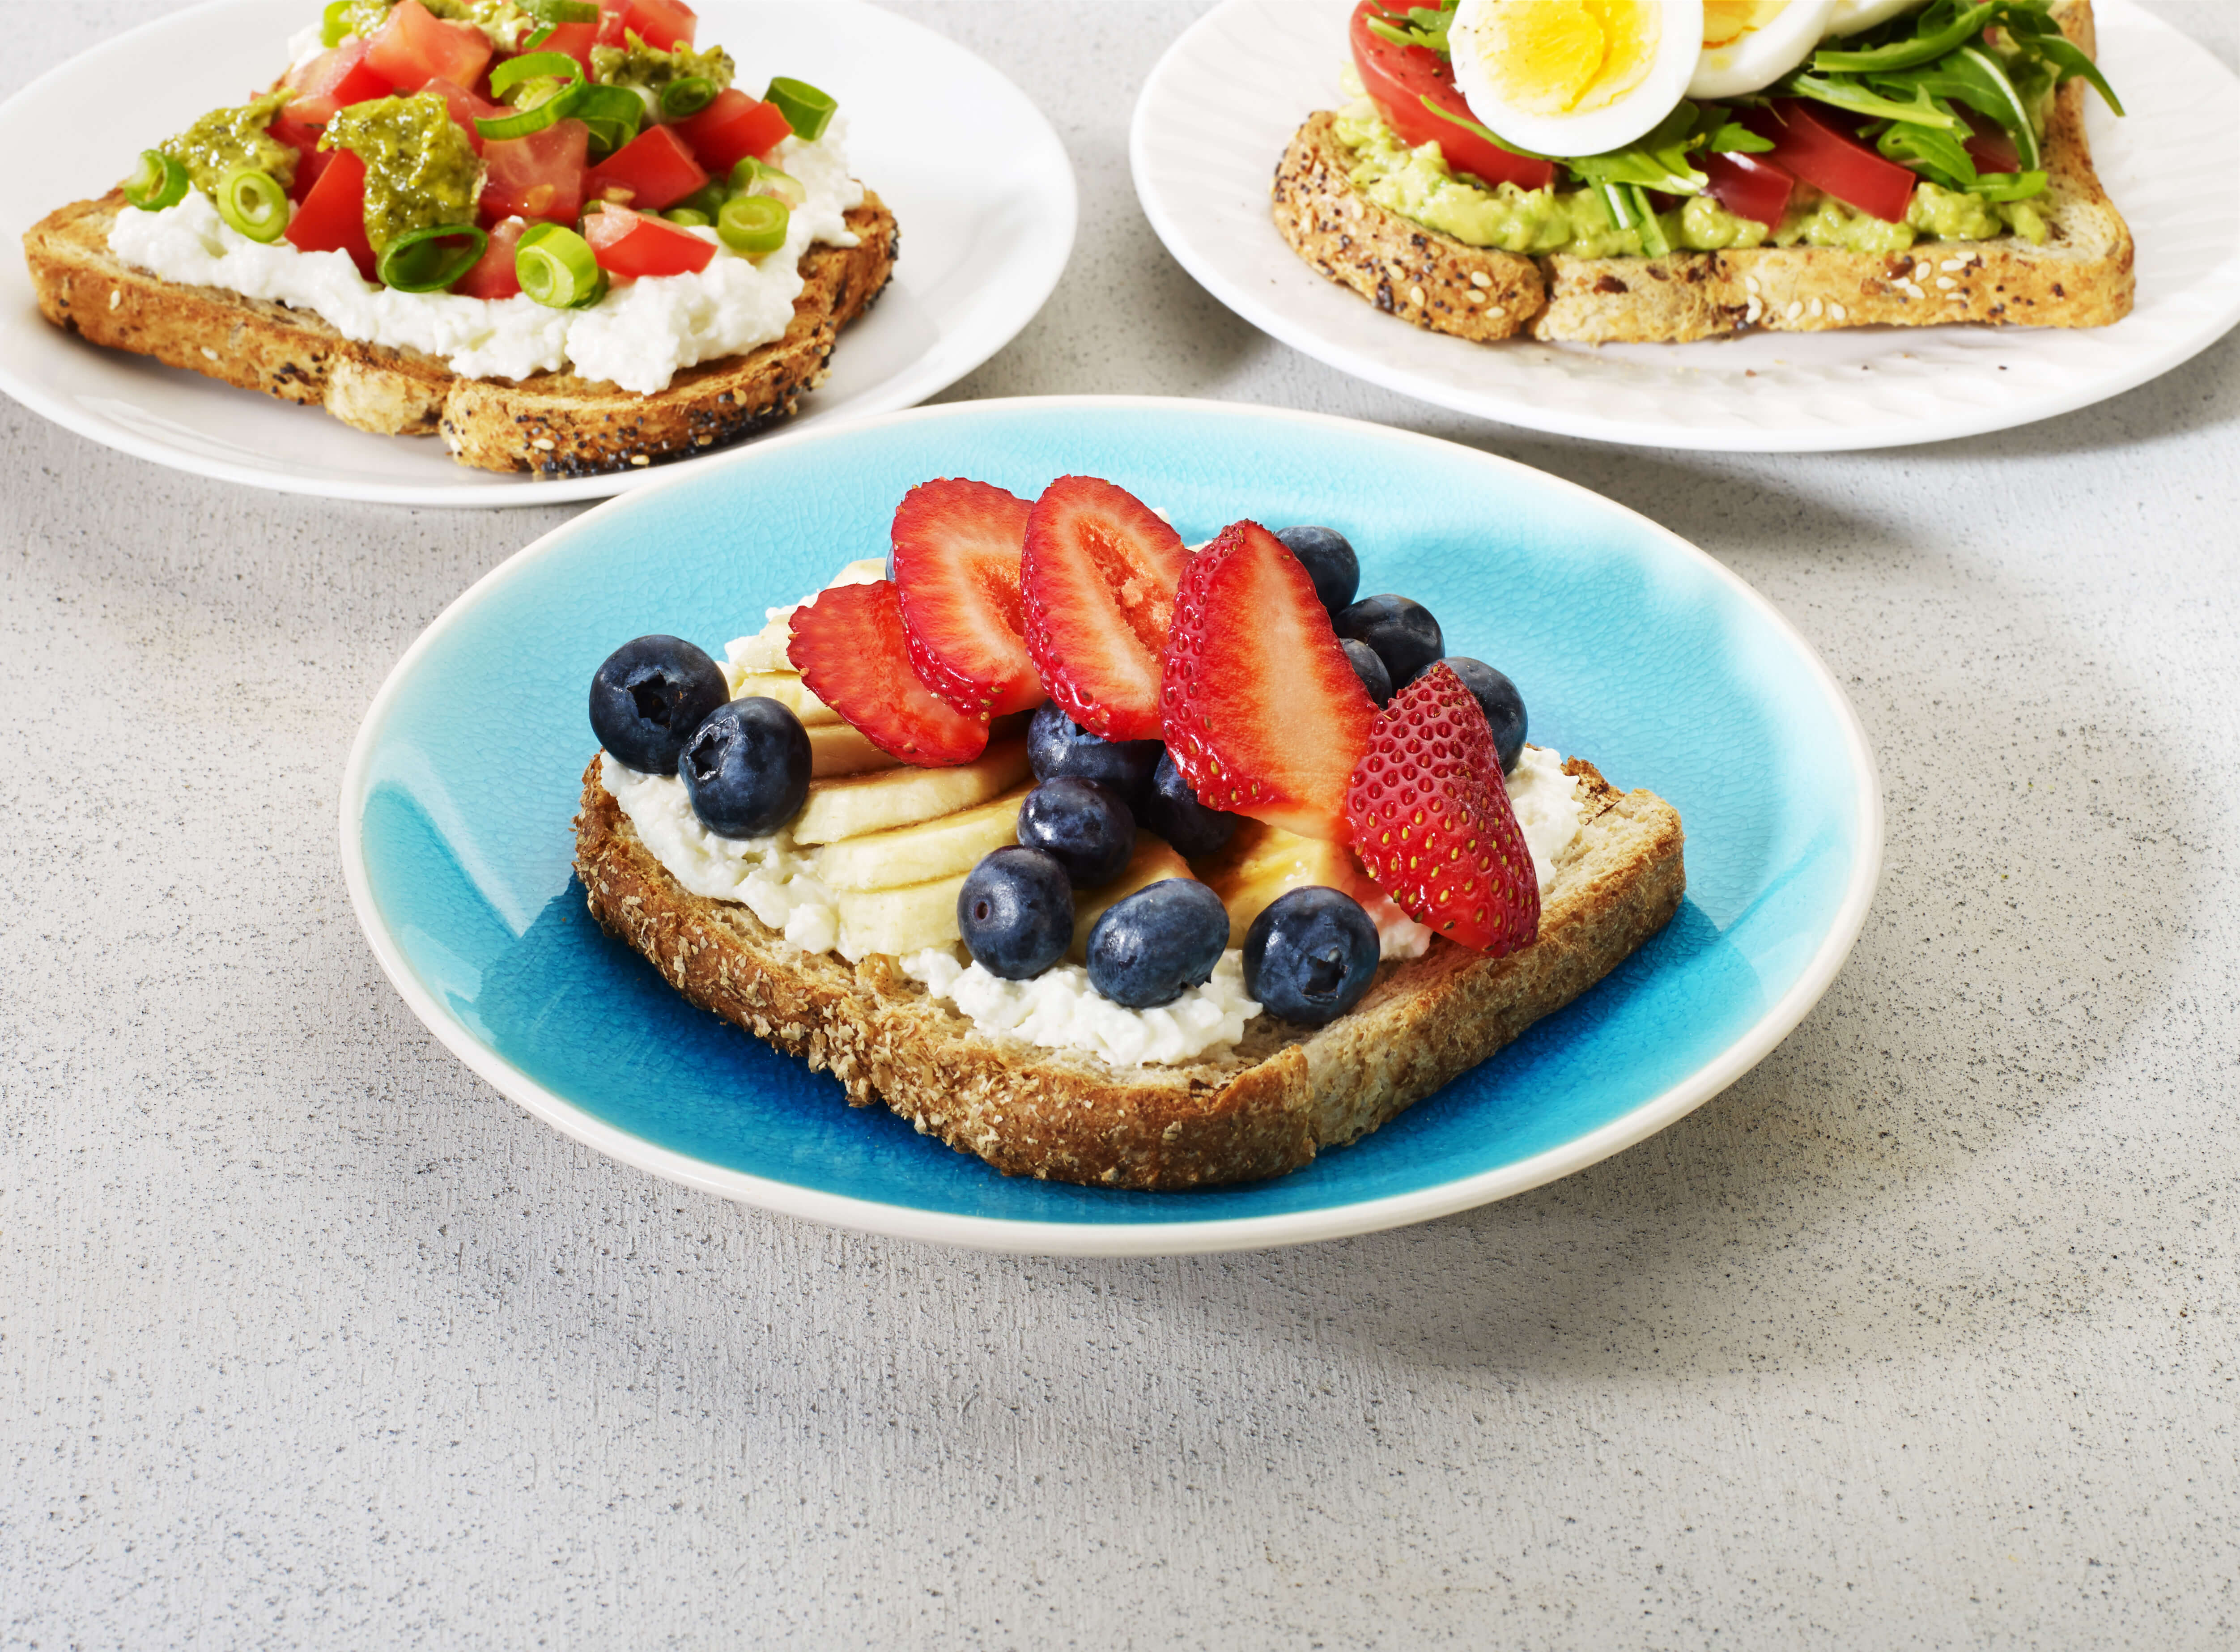 strawberries, banana and blueberries on ricotta on a slice of wholemeal toast 